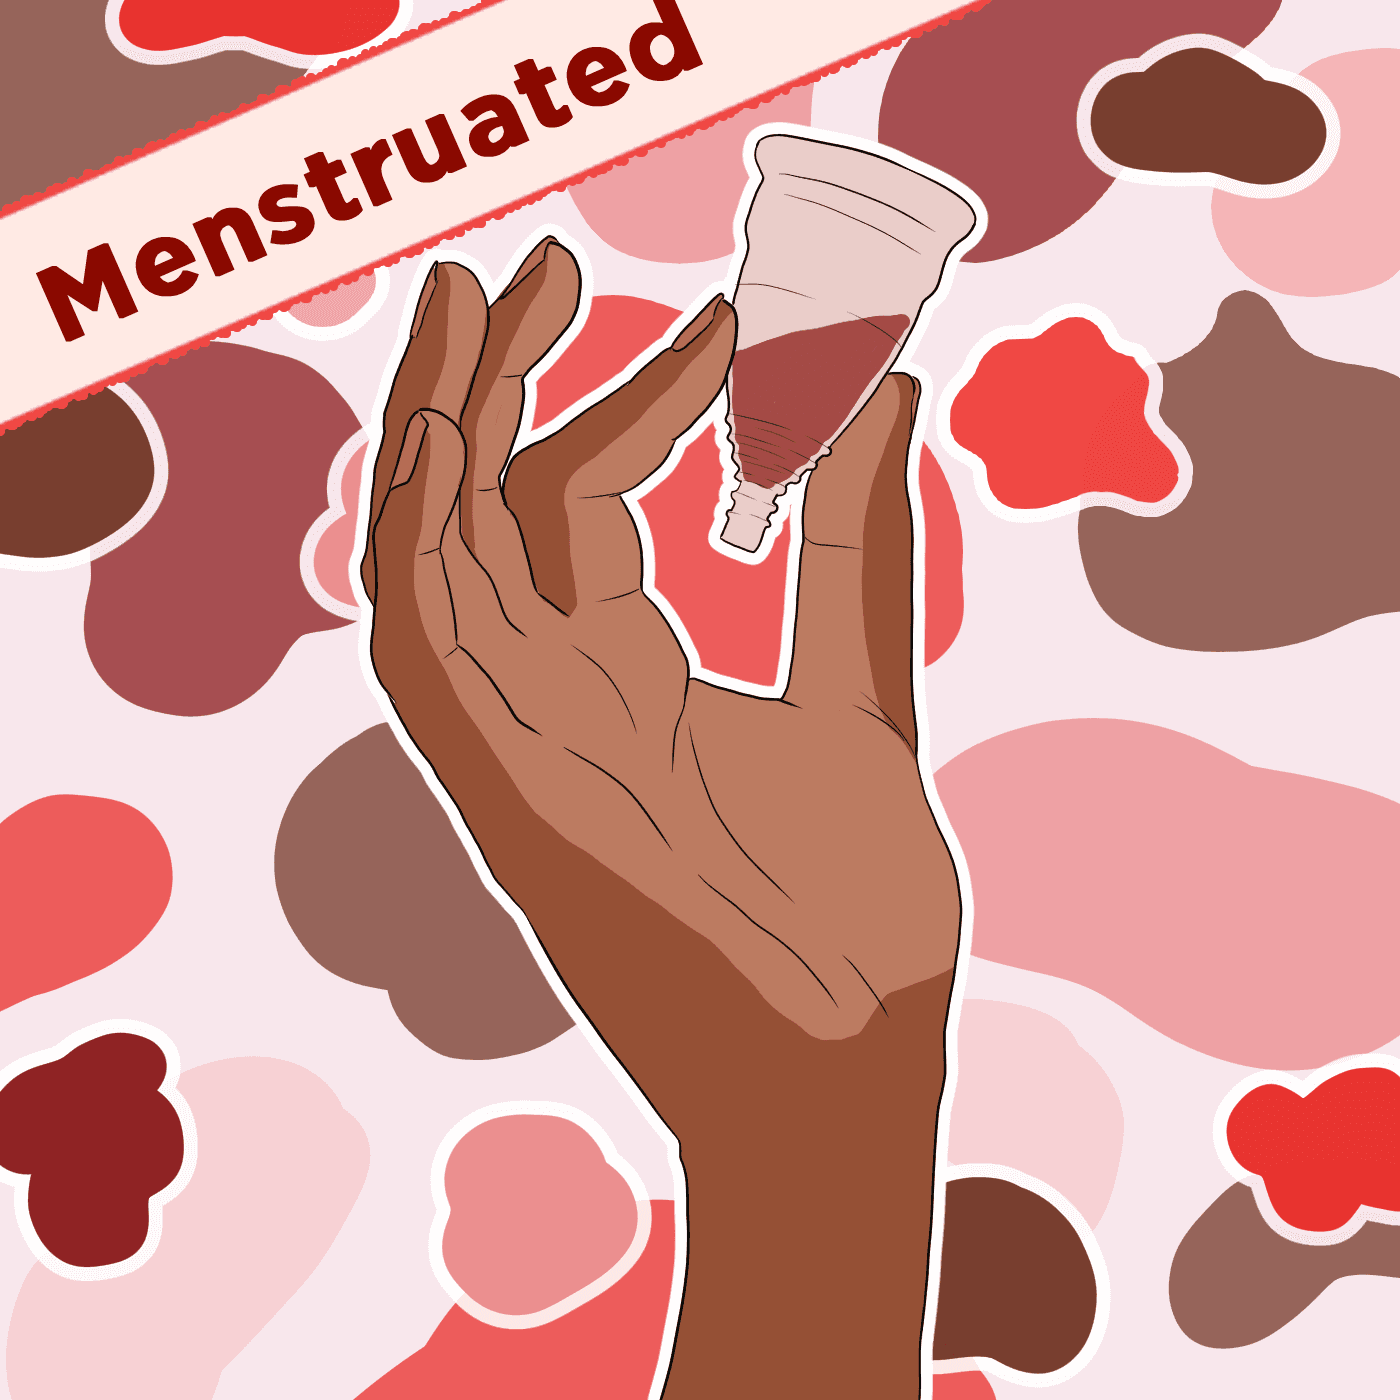 Thumbnail for "Menstruated: What Our Period Blood Tells Us".